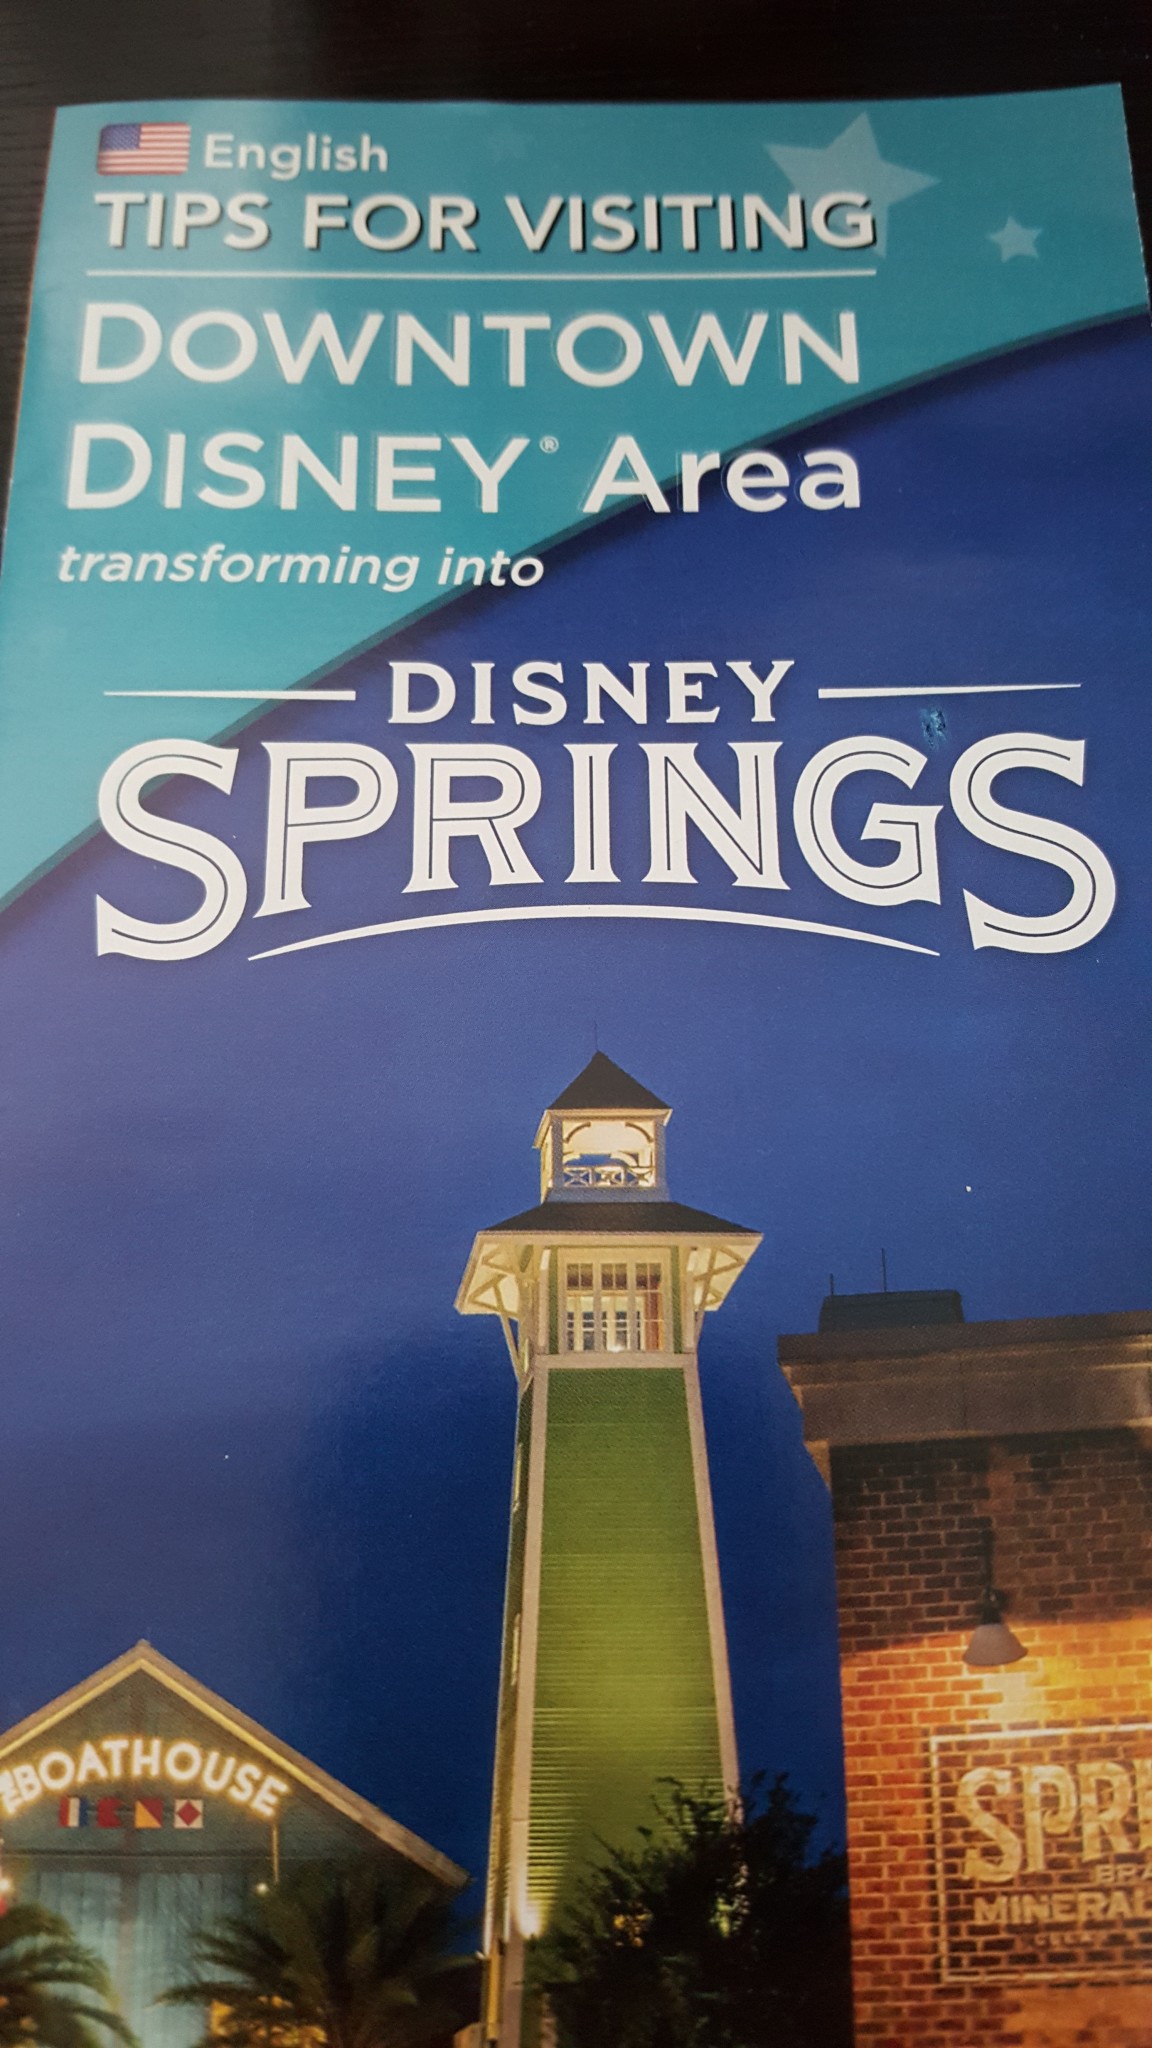 Downtown Disney Will Officially Become Disney Springs on September 29th